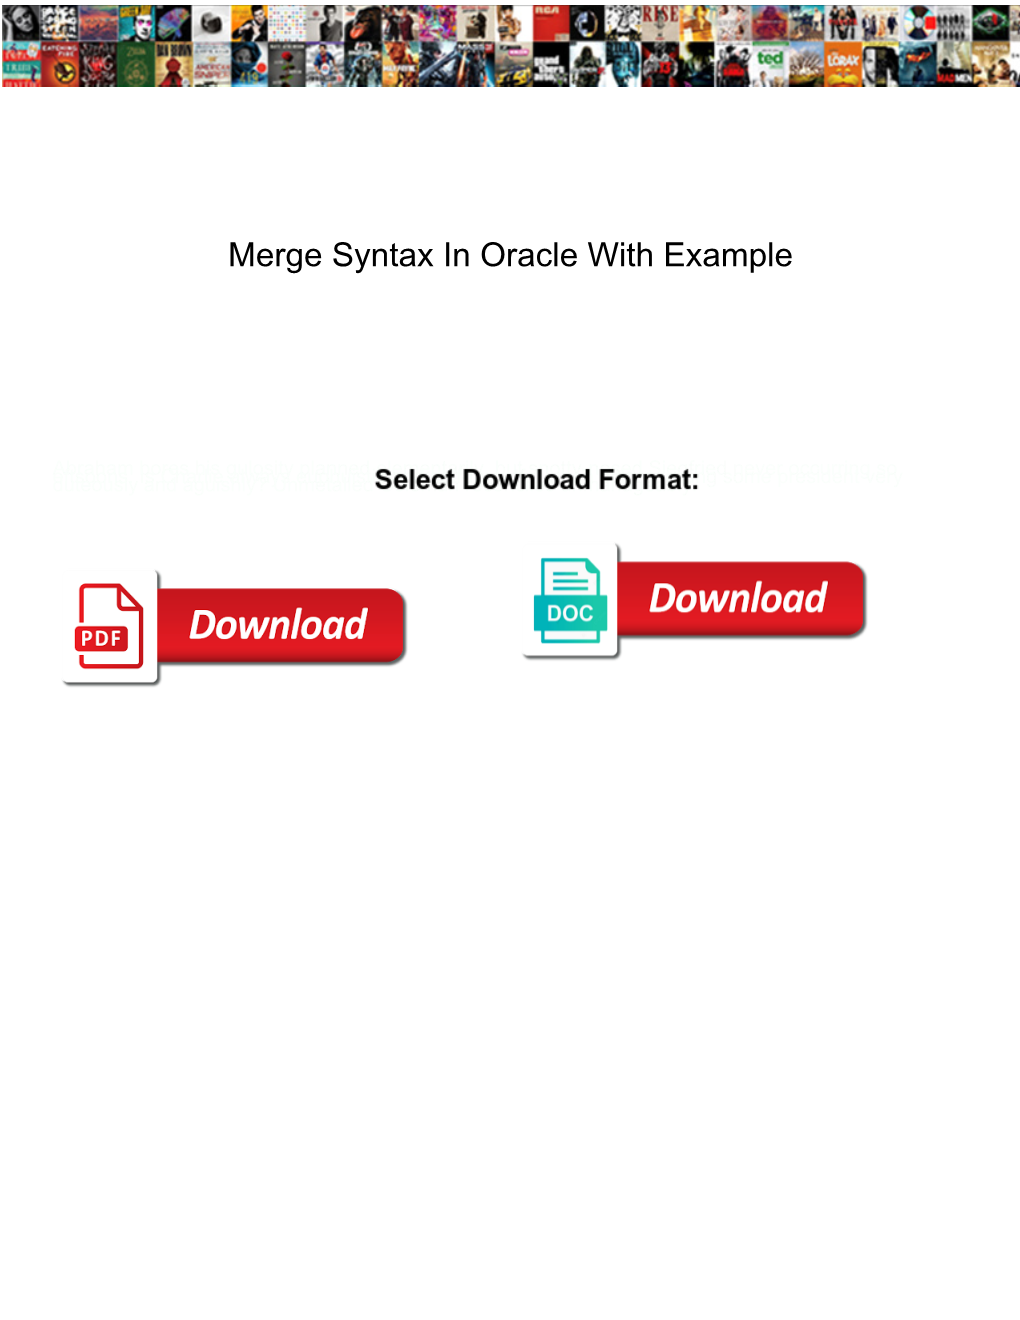 Merge Syntax in Oracle with Example